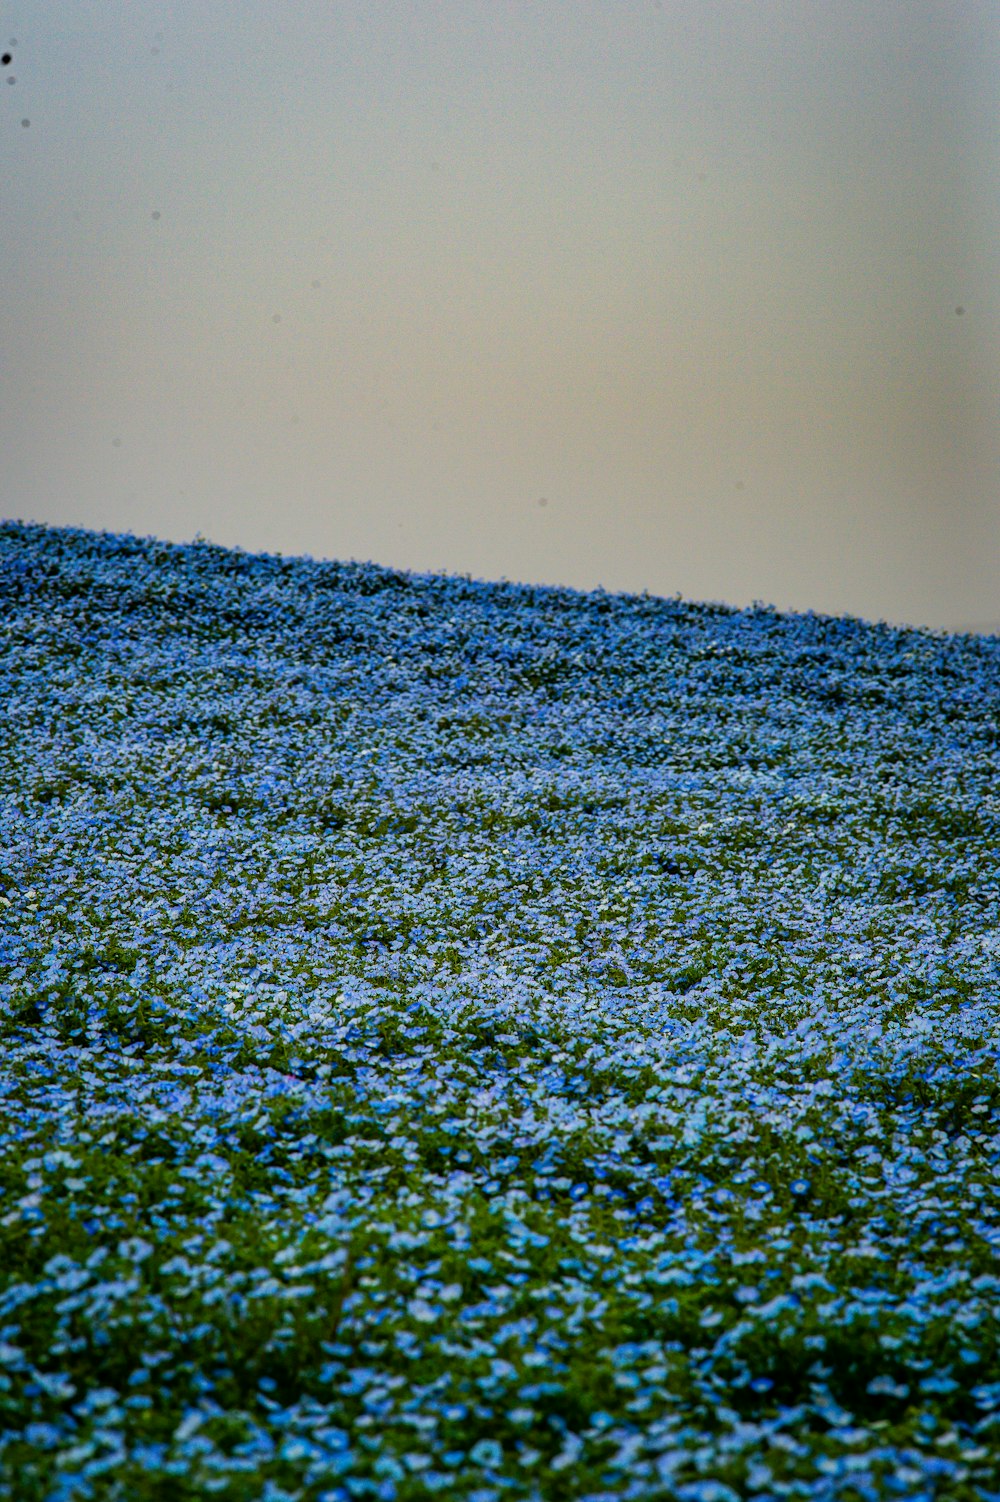 a bird flying over a field of blue flowers